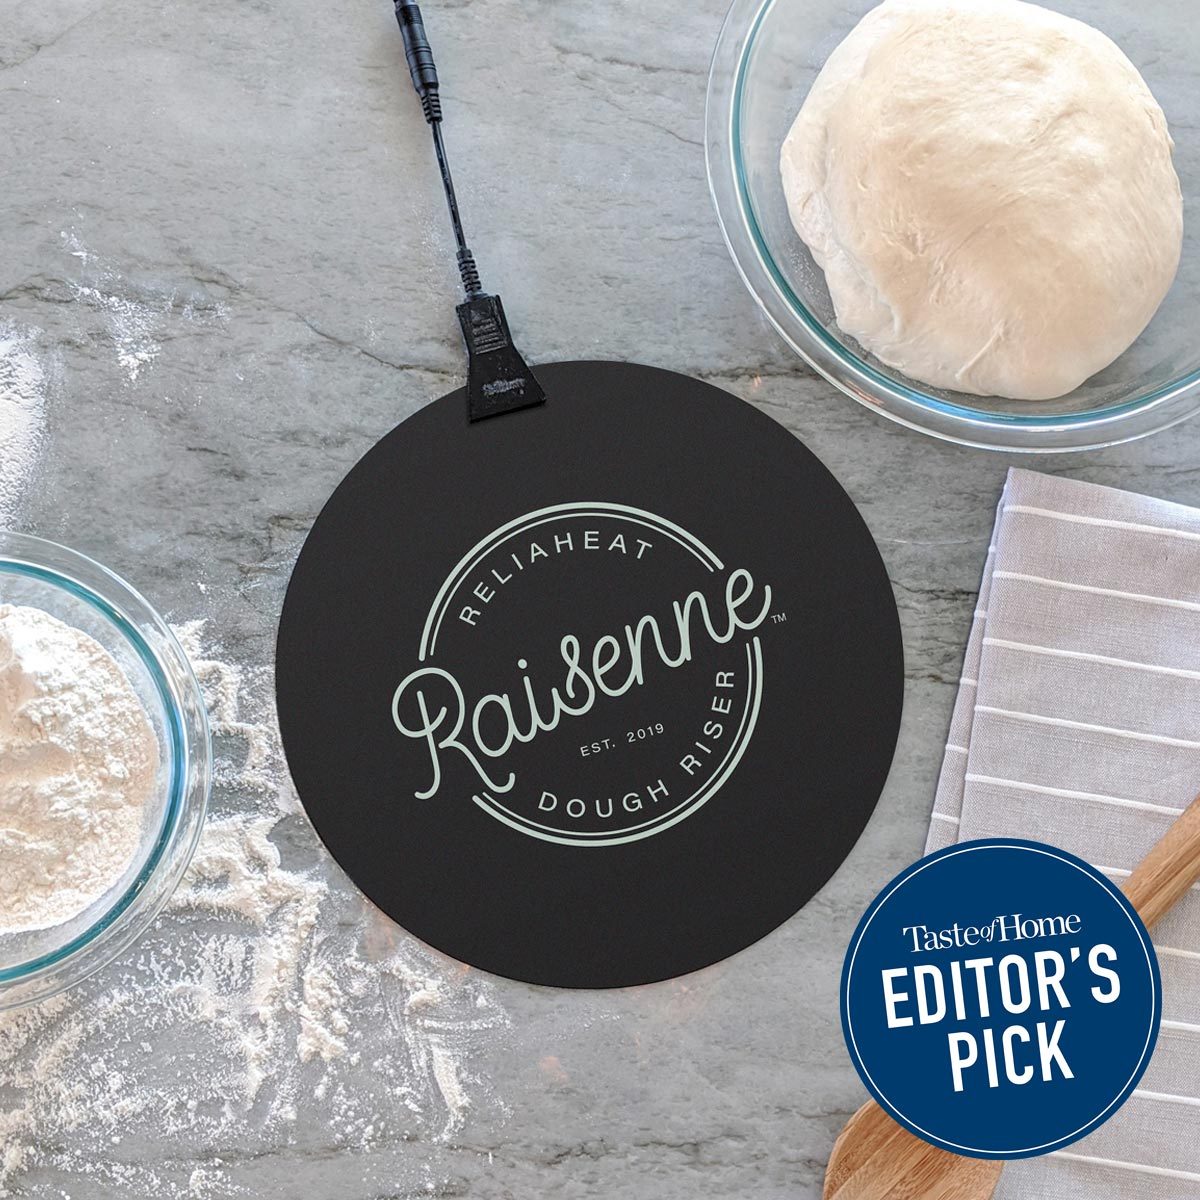 19 Best Gifts For Bakers, According to Our Editors — Eat This Not That